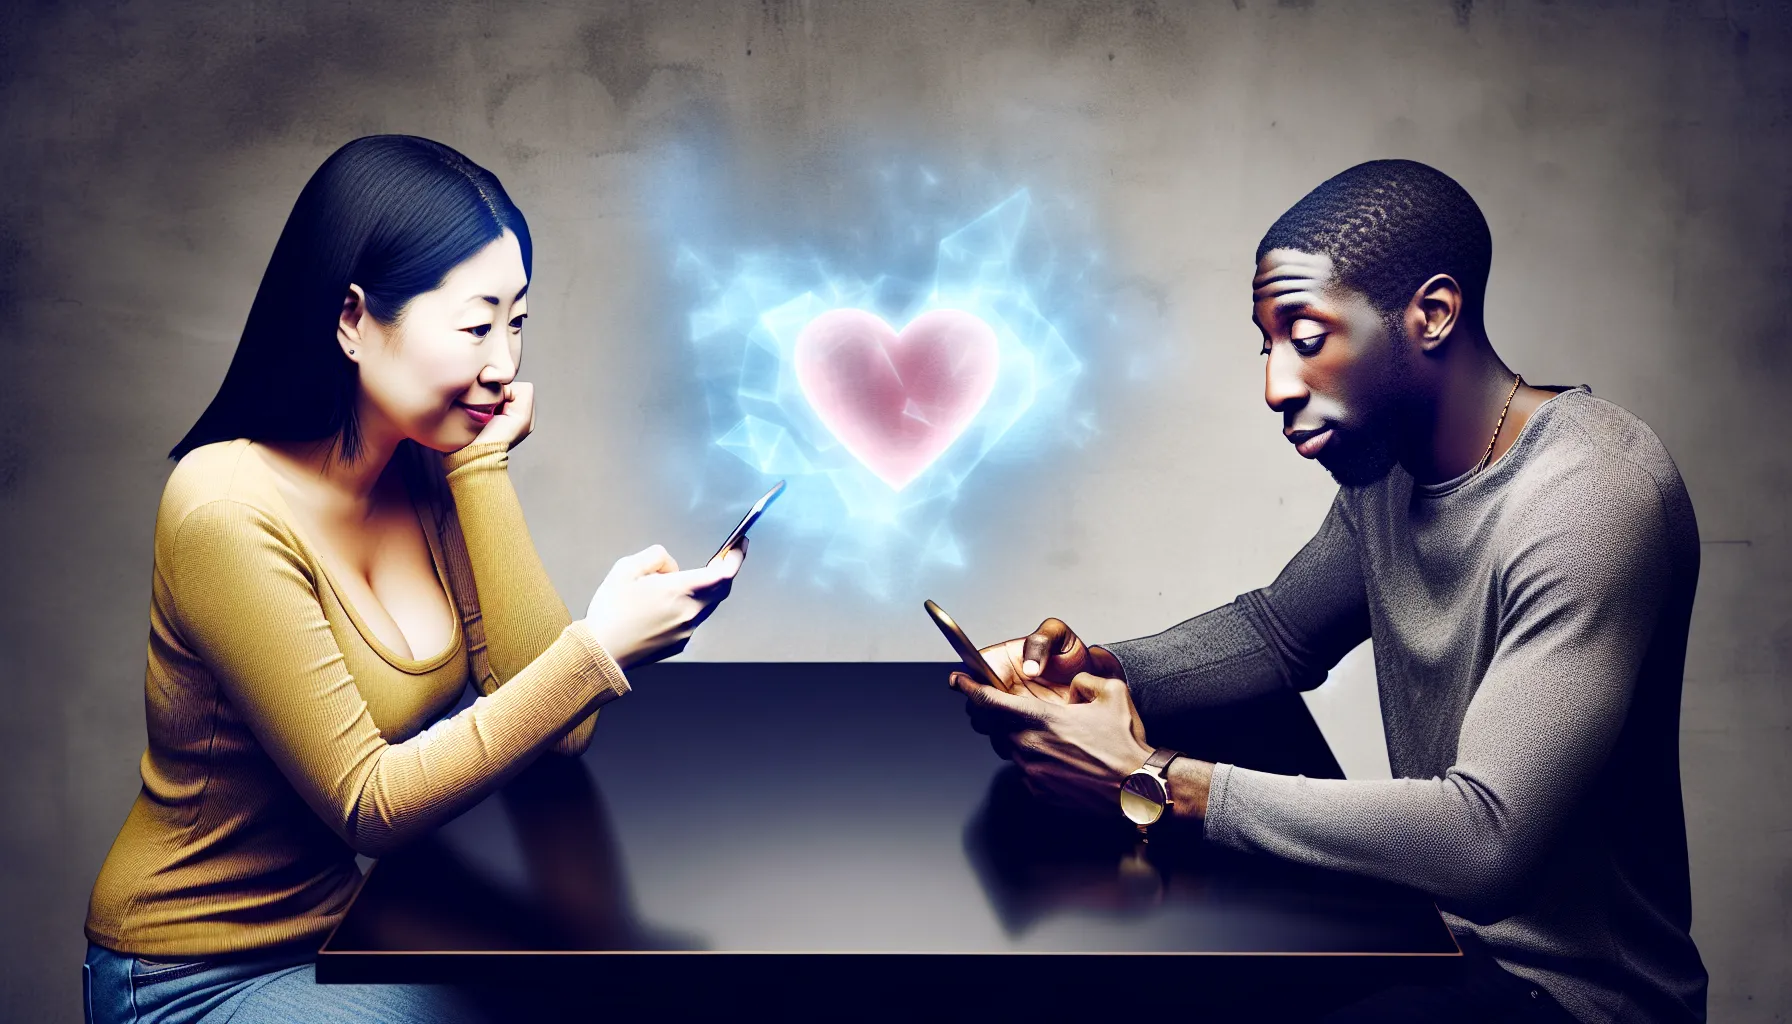 Modern dating visualized through smartphones and a floating heart emoji